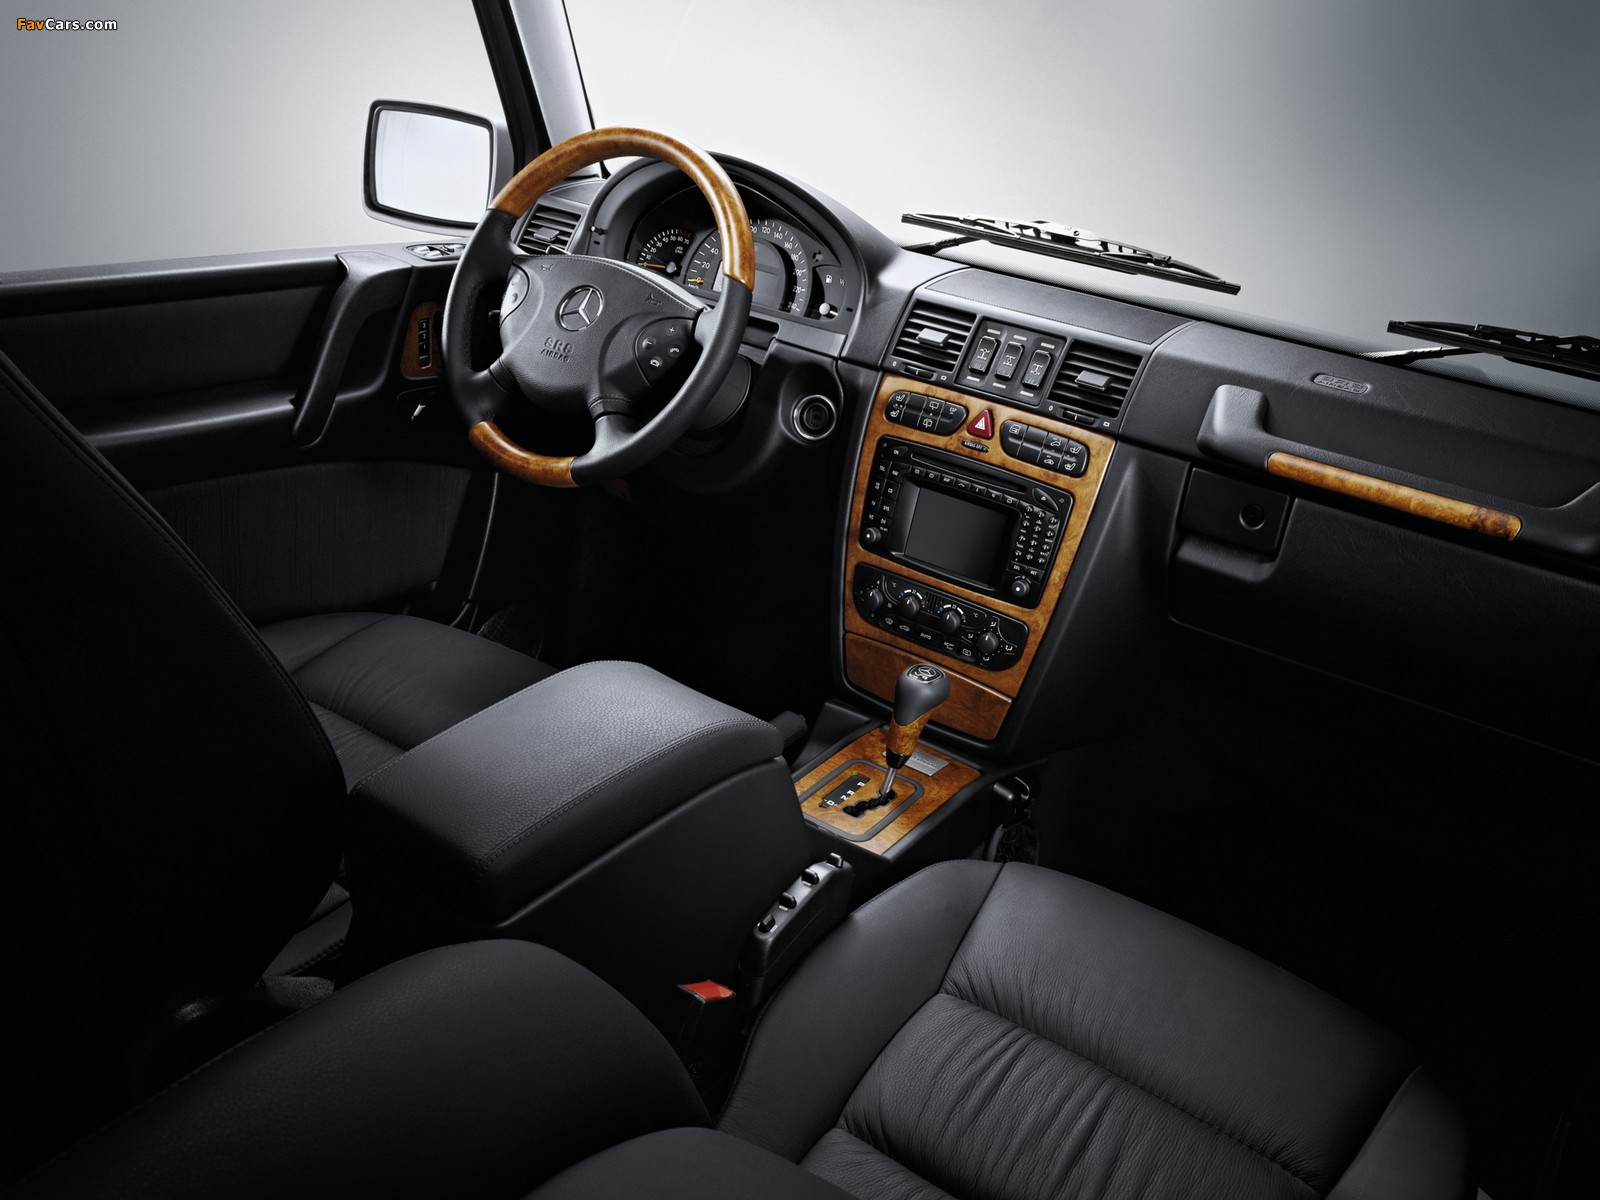 Mercedes-Benz G 500 Grand Edition (W463) 2006 images (1600 x 1200)